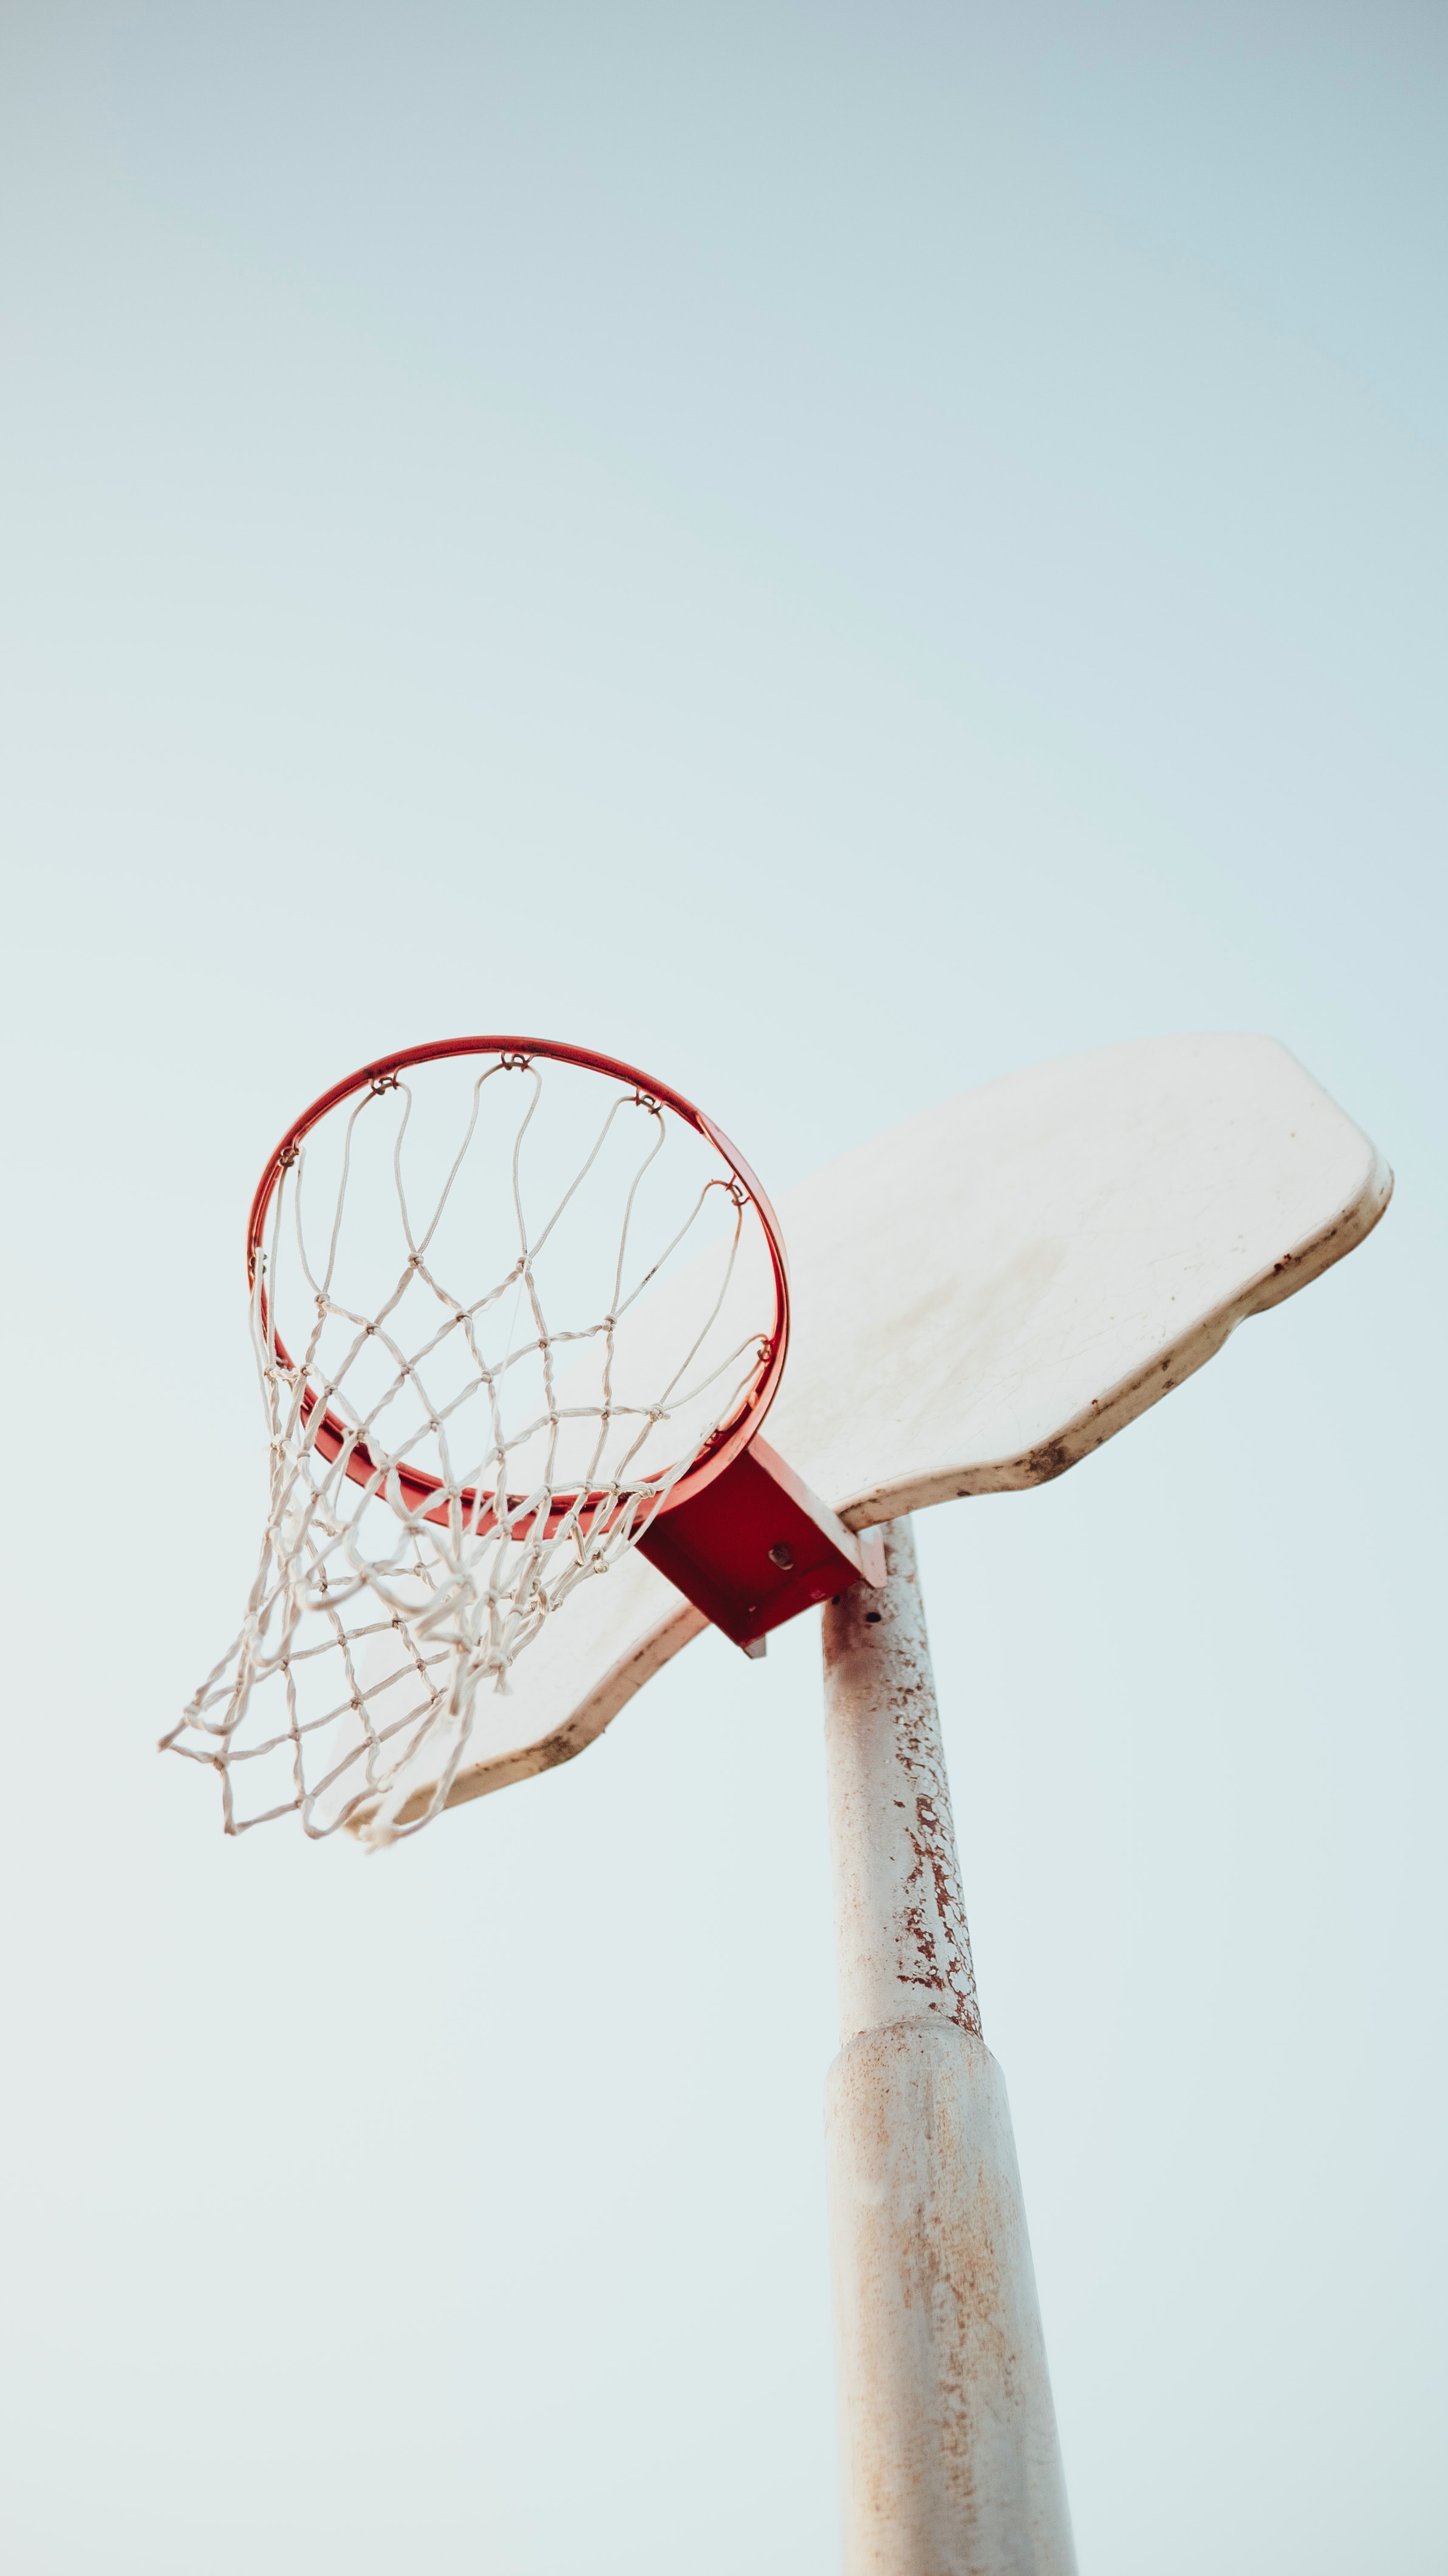 139608 download wallpaper sports, sky, basketball, ring, basketball hoop, basketball ring screensavers and pictures for free